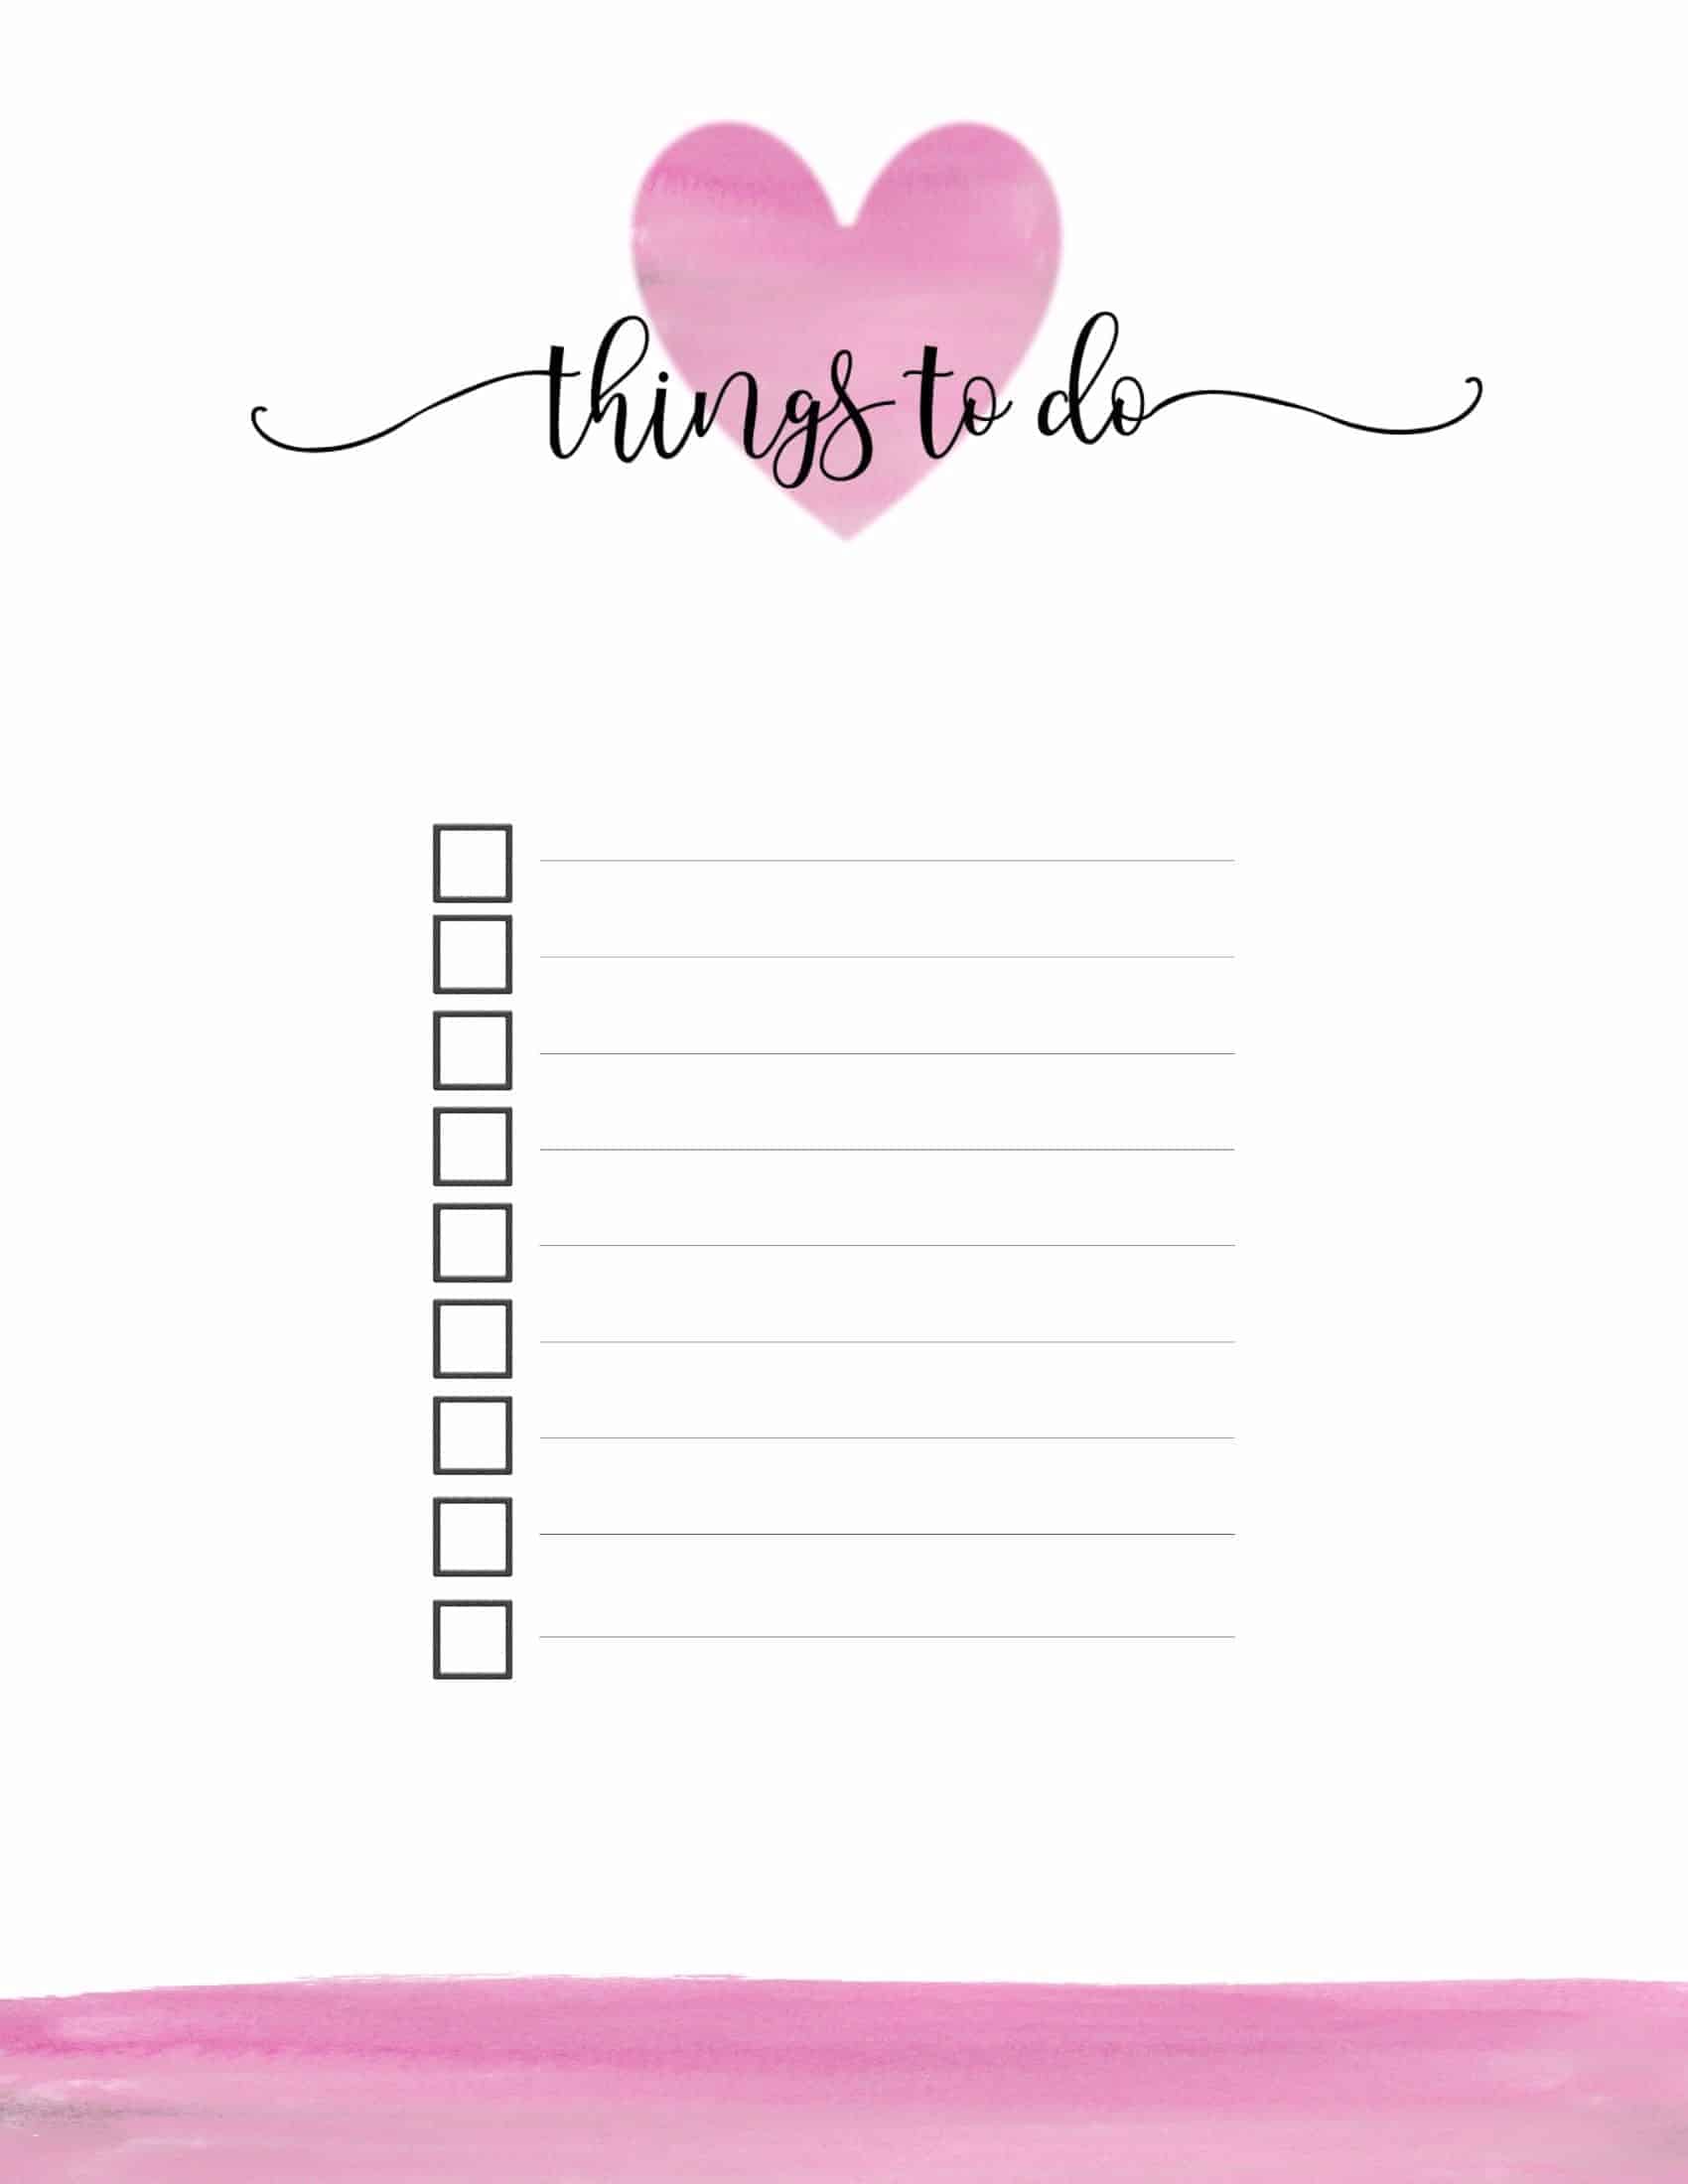 FREE Printable To Do List | Print or Use Online | Access from Anywhere